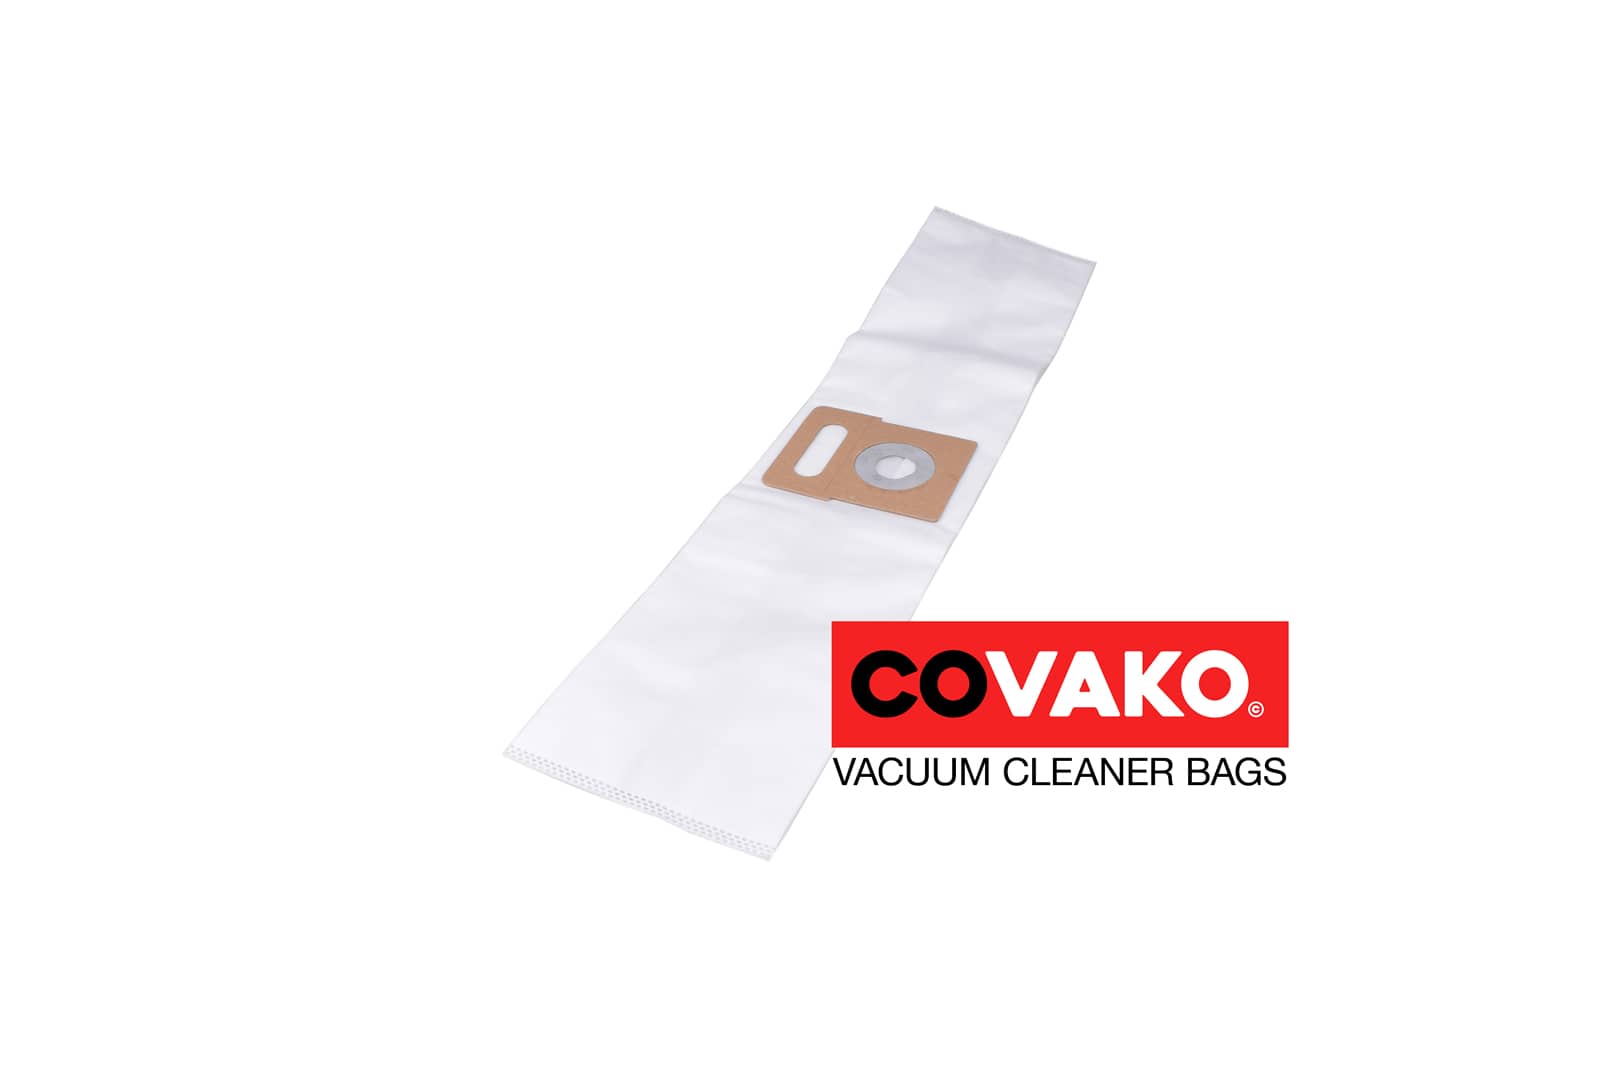 Oehme Otto Profi / Synthesis - Oehme Otto vacuum cleaner bags